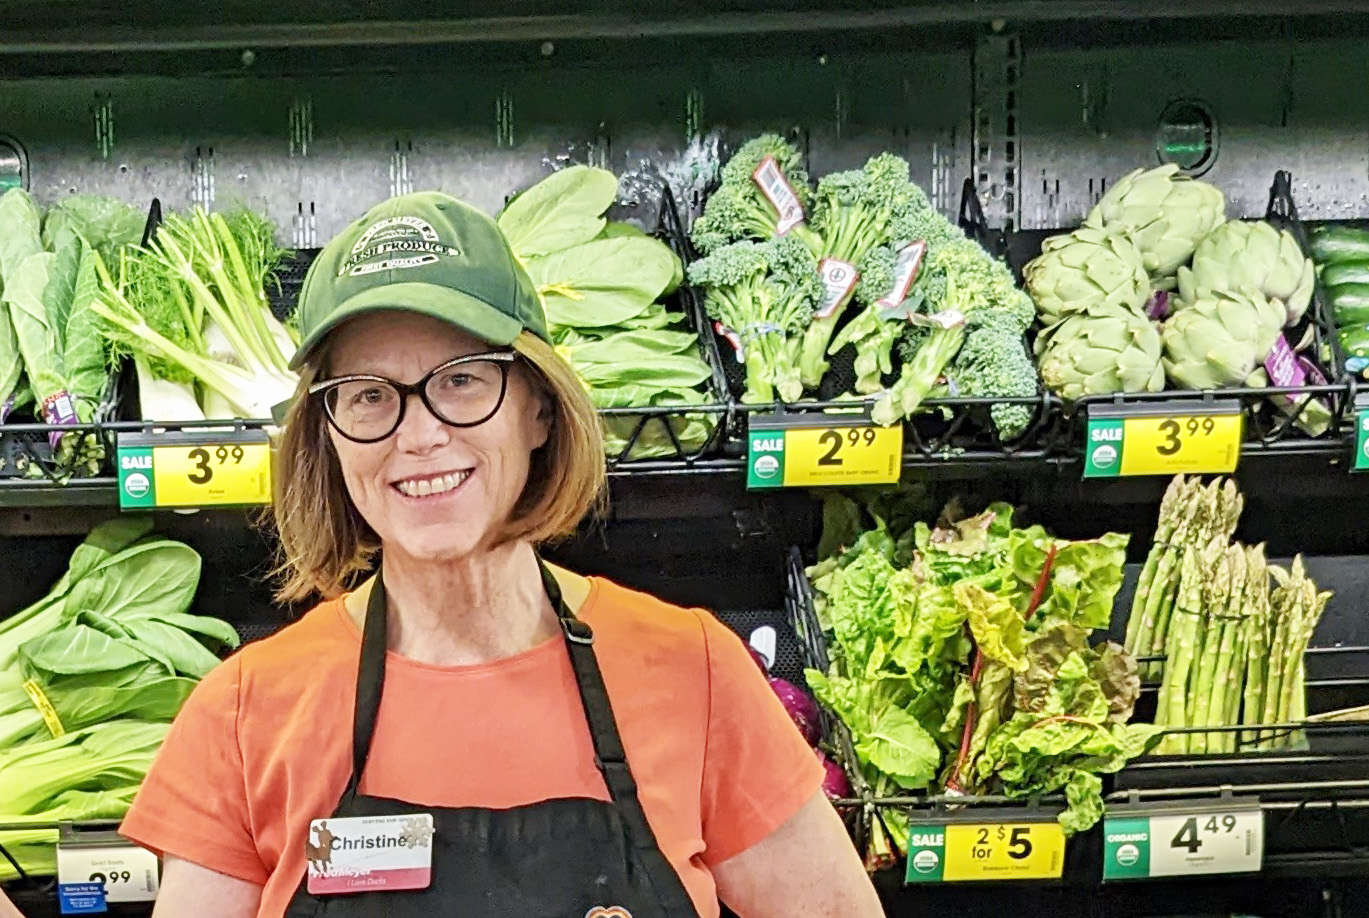 A women with red hair, black glasses, and orange shirt and a green hat poses in front of a produce section at Fred Meyer in Richland, Washington.